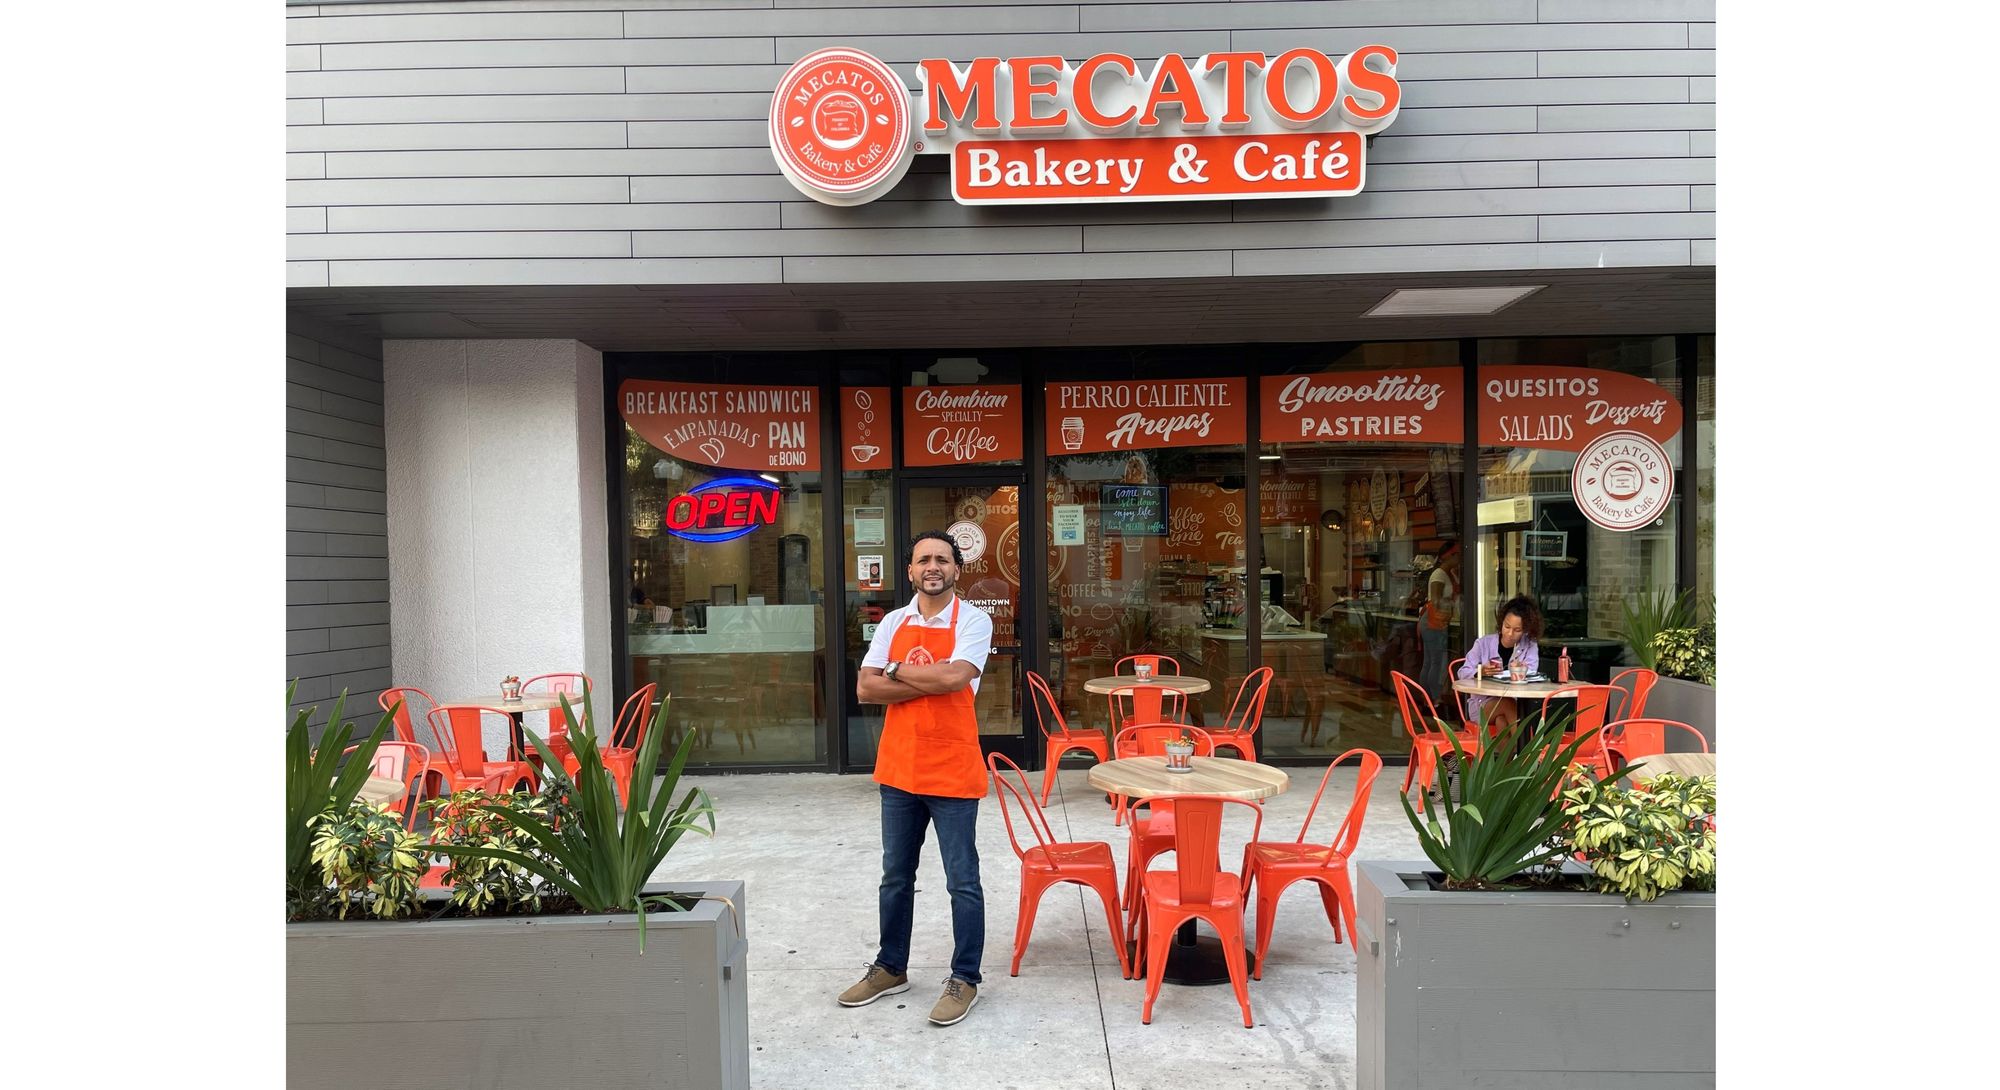 Authentic Delicious Colombian Food - Mecatos Bakery & Cafe